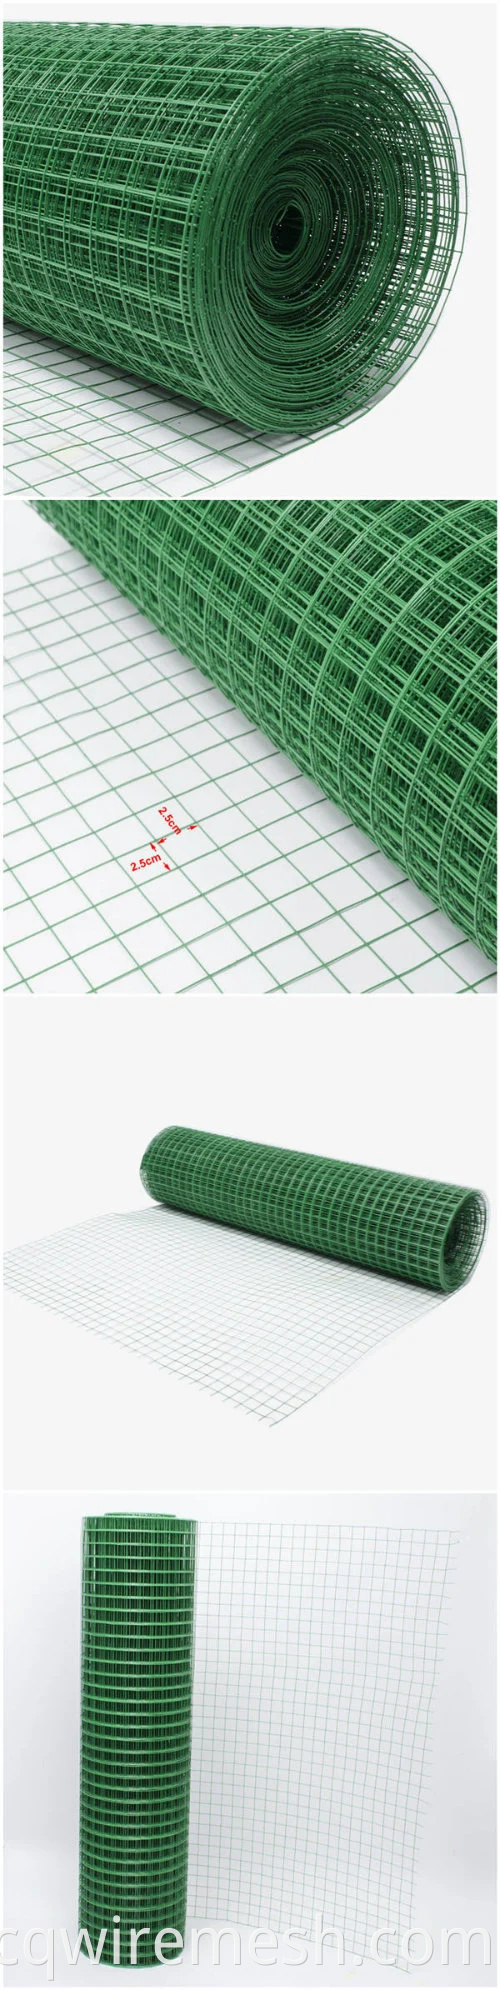 Amazon Ebay Choice PVC Coated Galvanized Hole 1X1 Inch Welded Wire Mesh Fencing (WWMF)